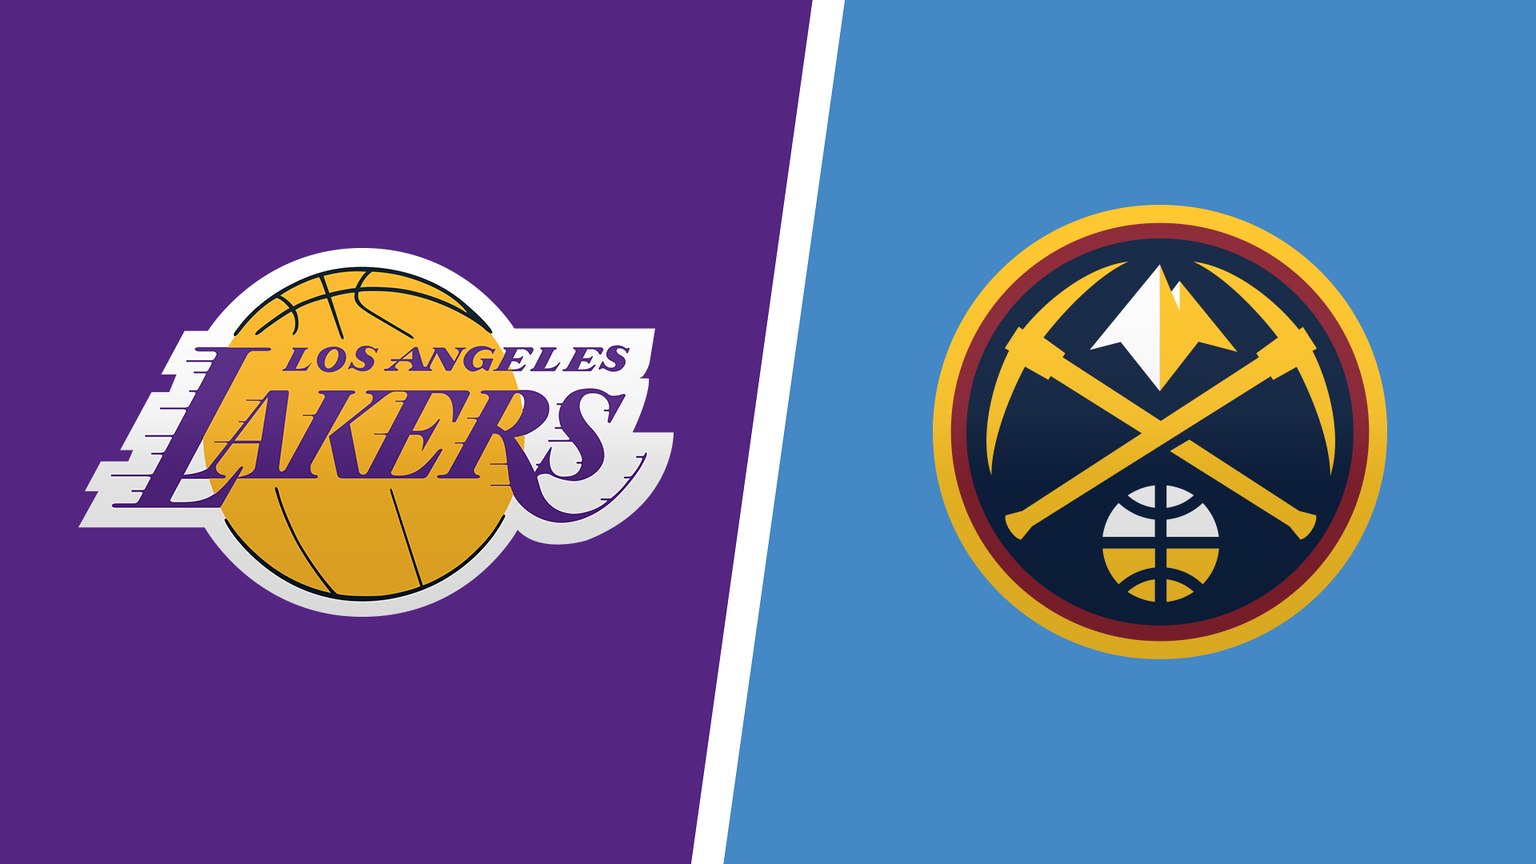 Lakers vs Nuggets